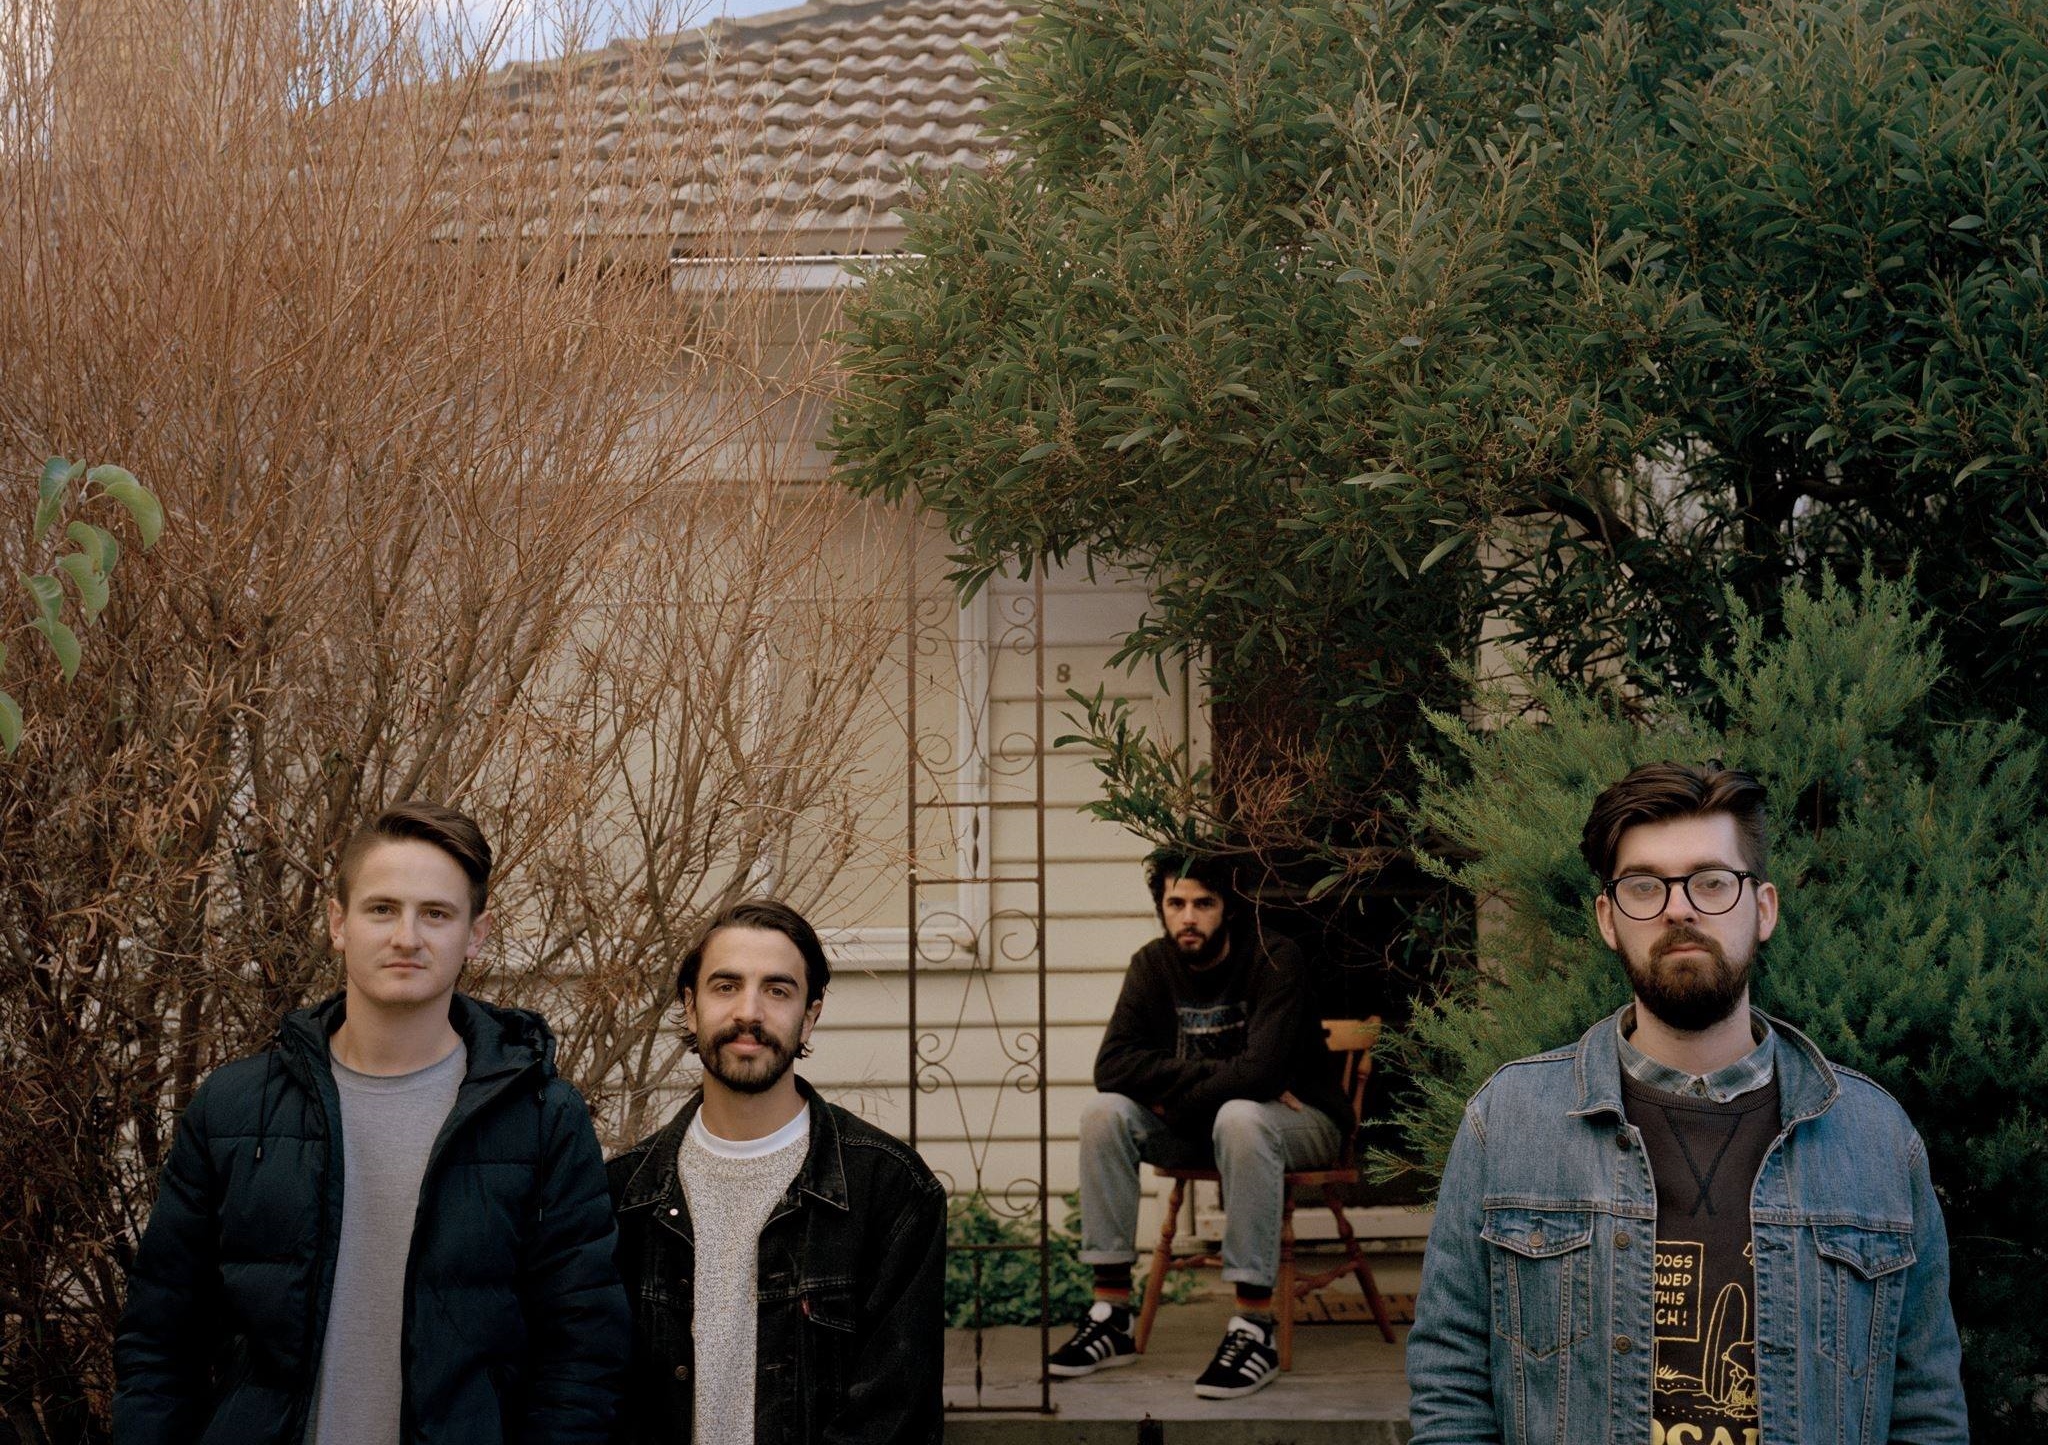 Melbourne’s Mount Defiance Join Whisk & Key Records